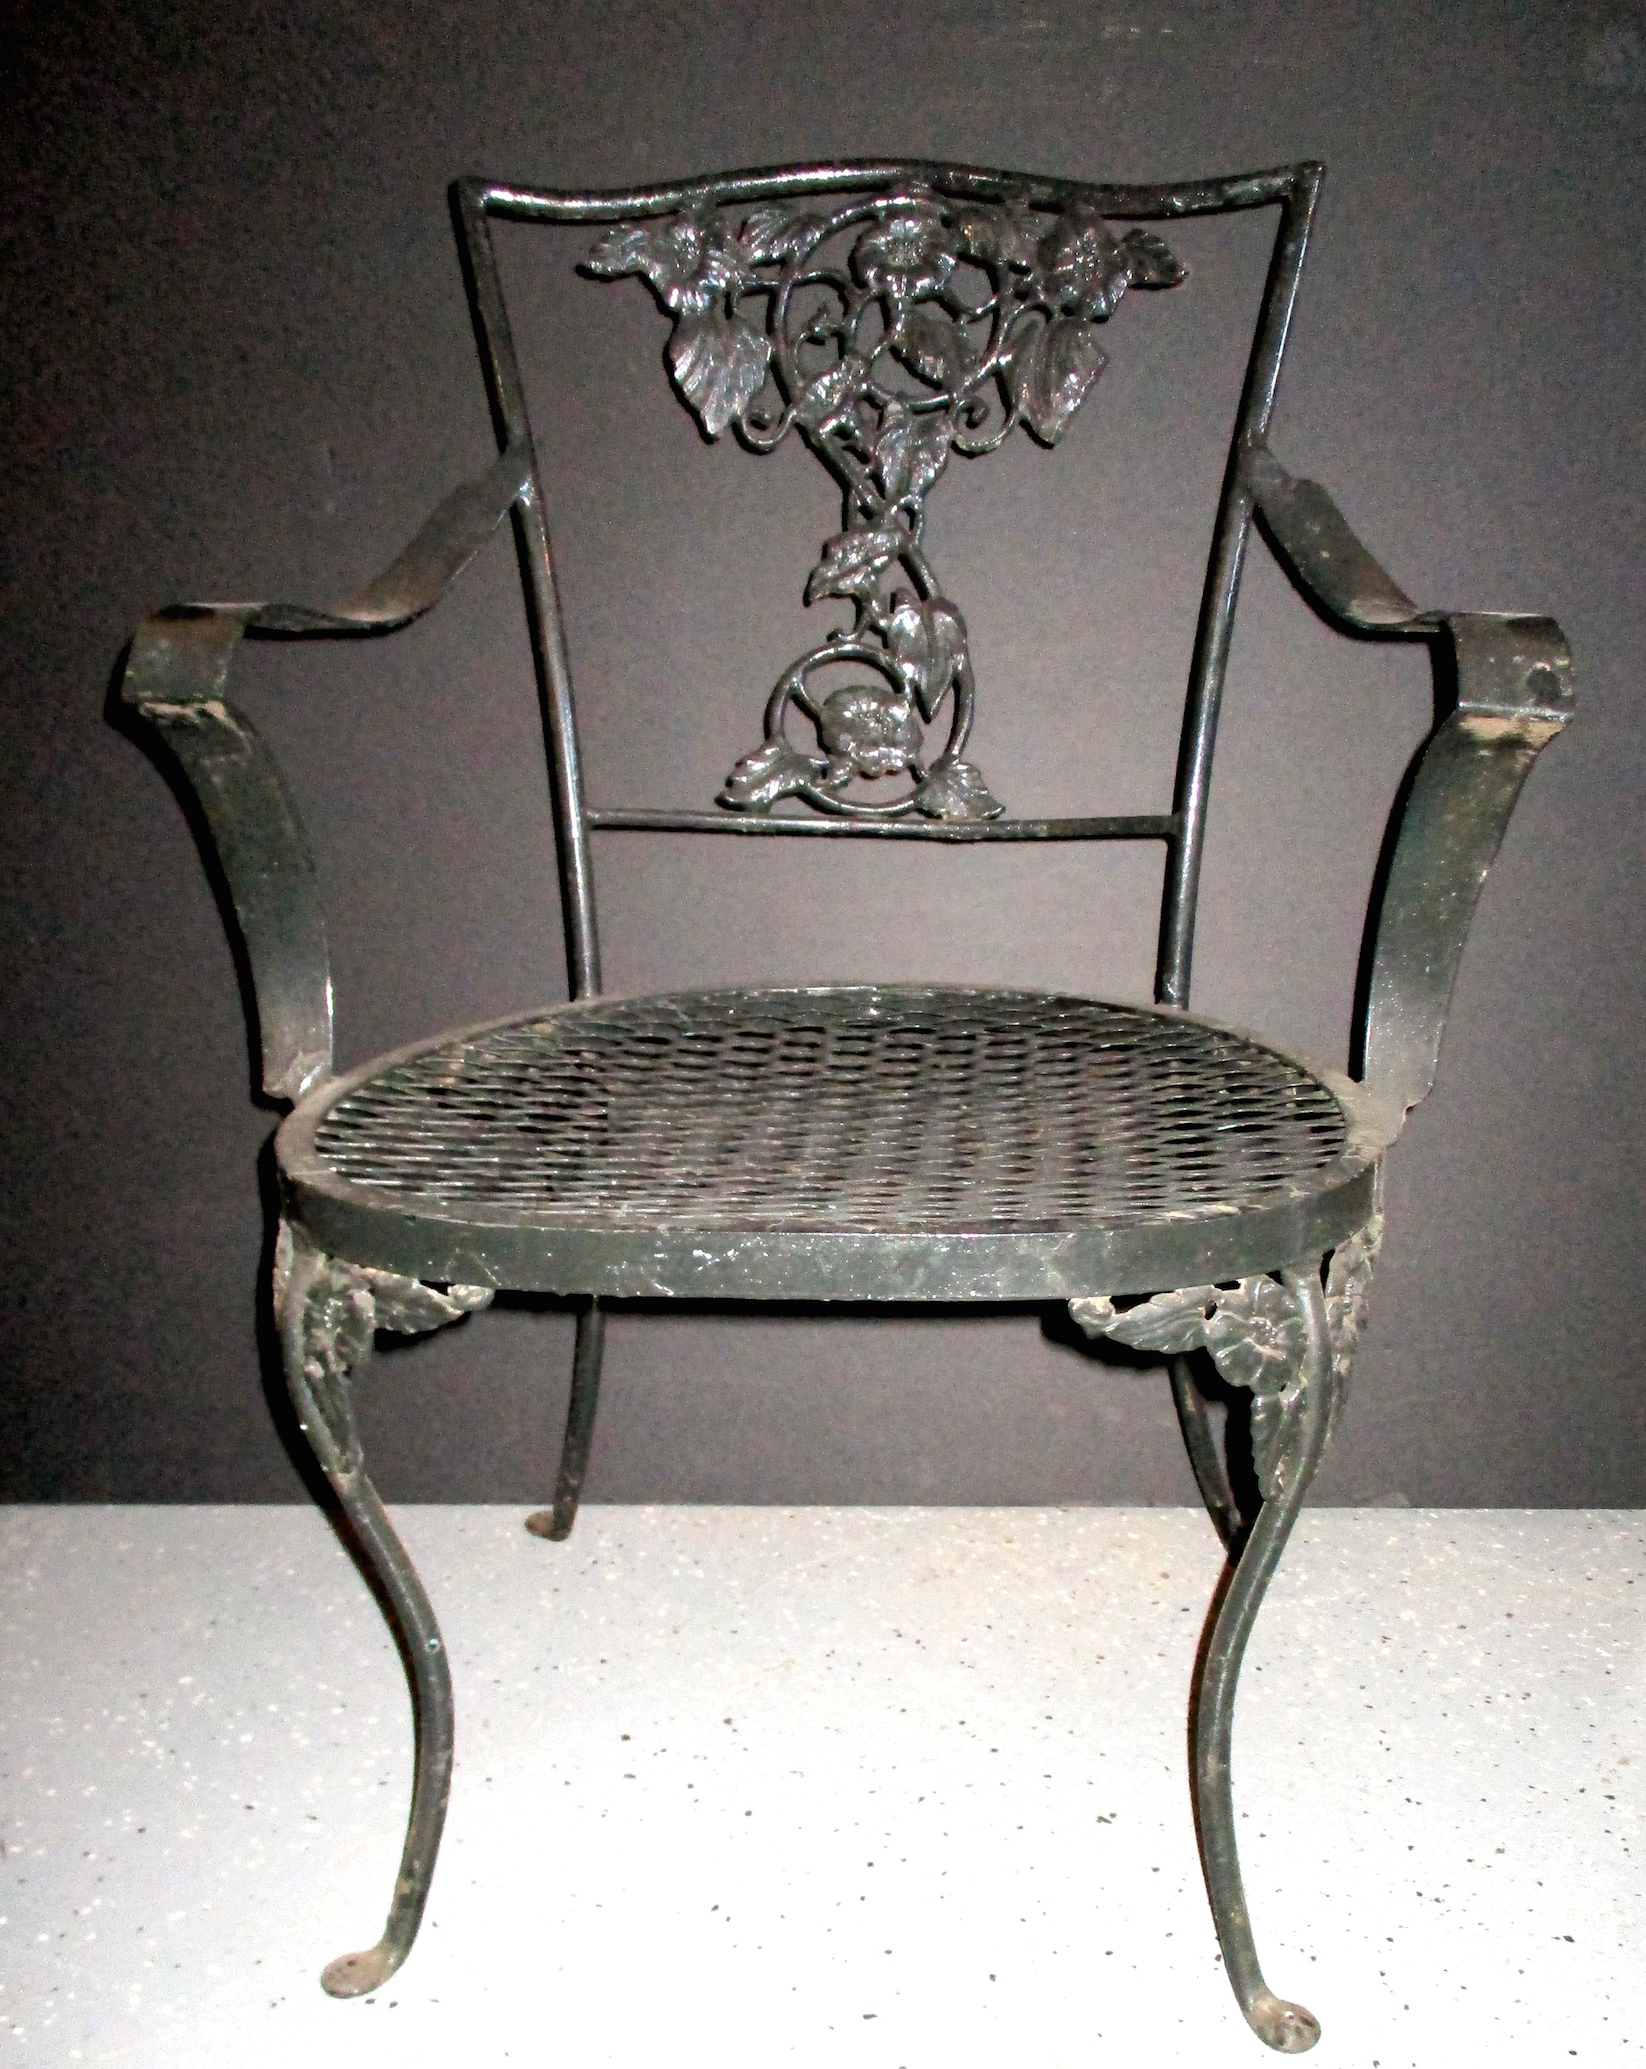 One of a Set of 4 Iron Garden Table Chairs (Max Dimensions - 32